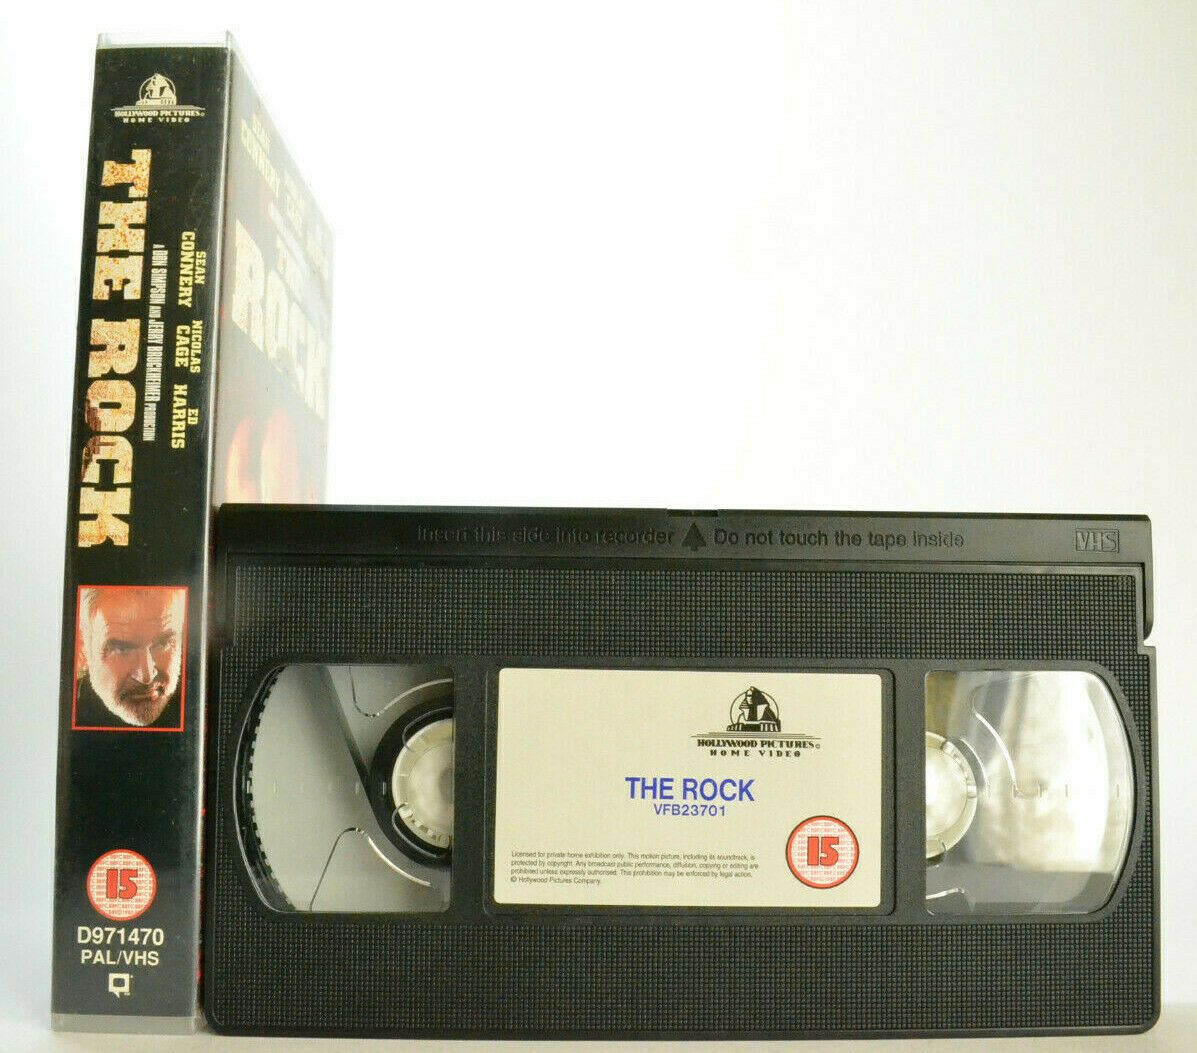 The Rock: Film By M.Bay (1996) - Alcatraz - Top End Action - Sean Connery - VHS-